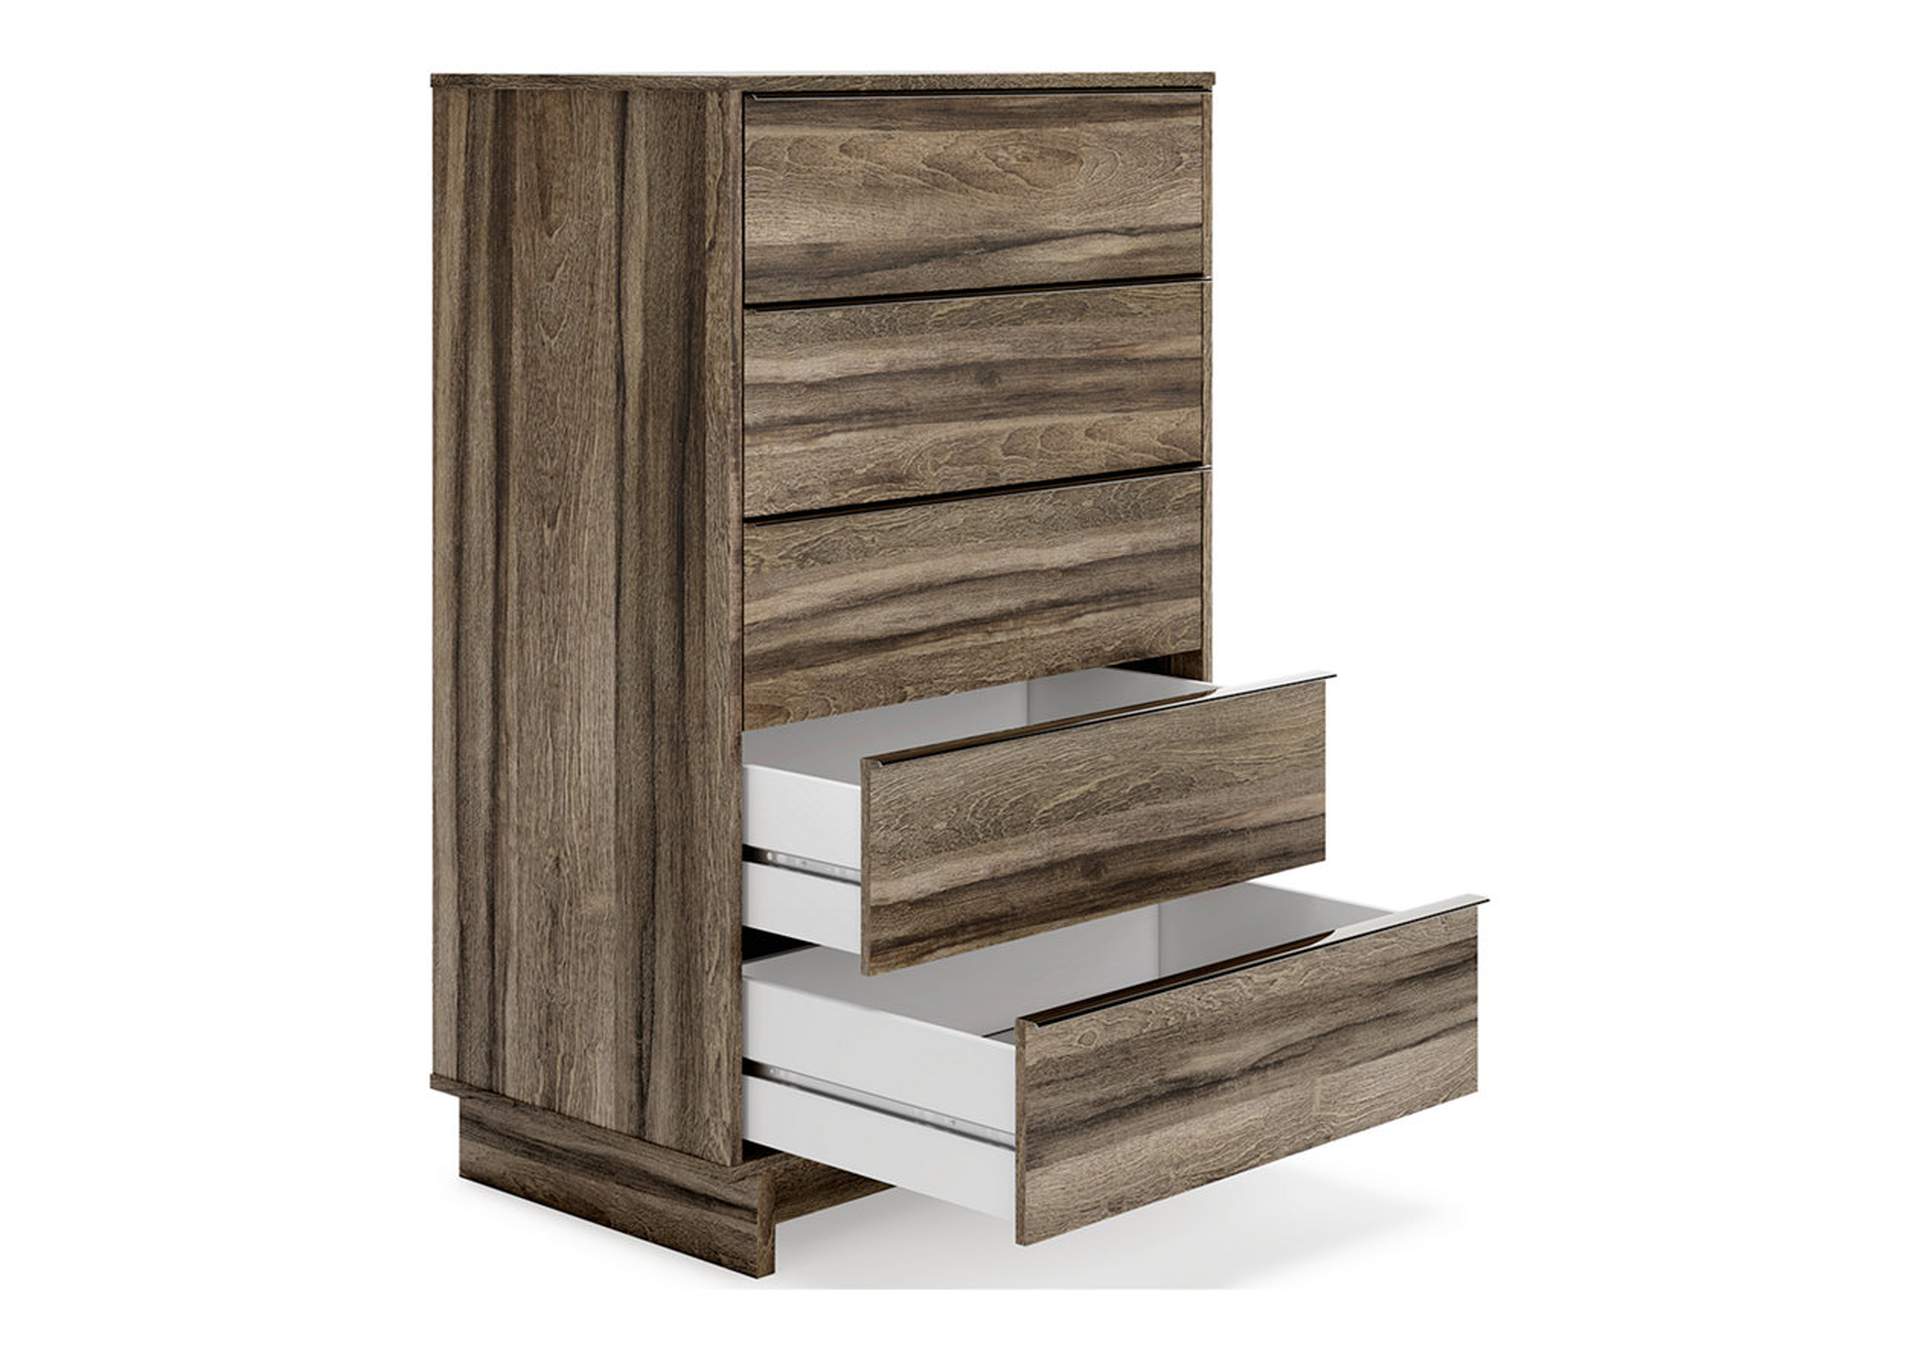 Shallifer Chest of Drawers,Signature Design By Ashley